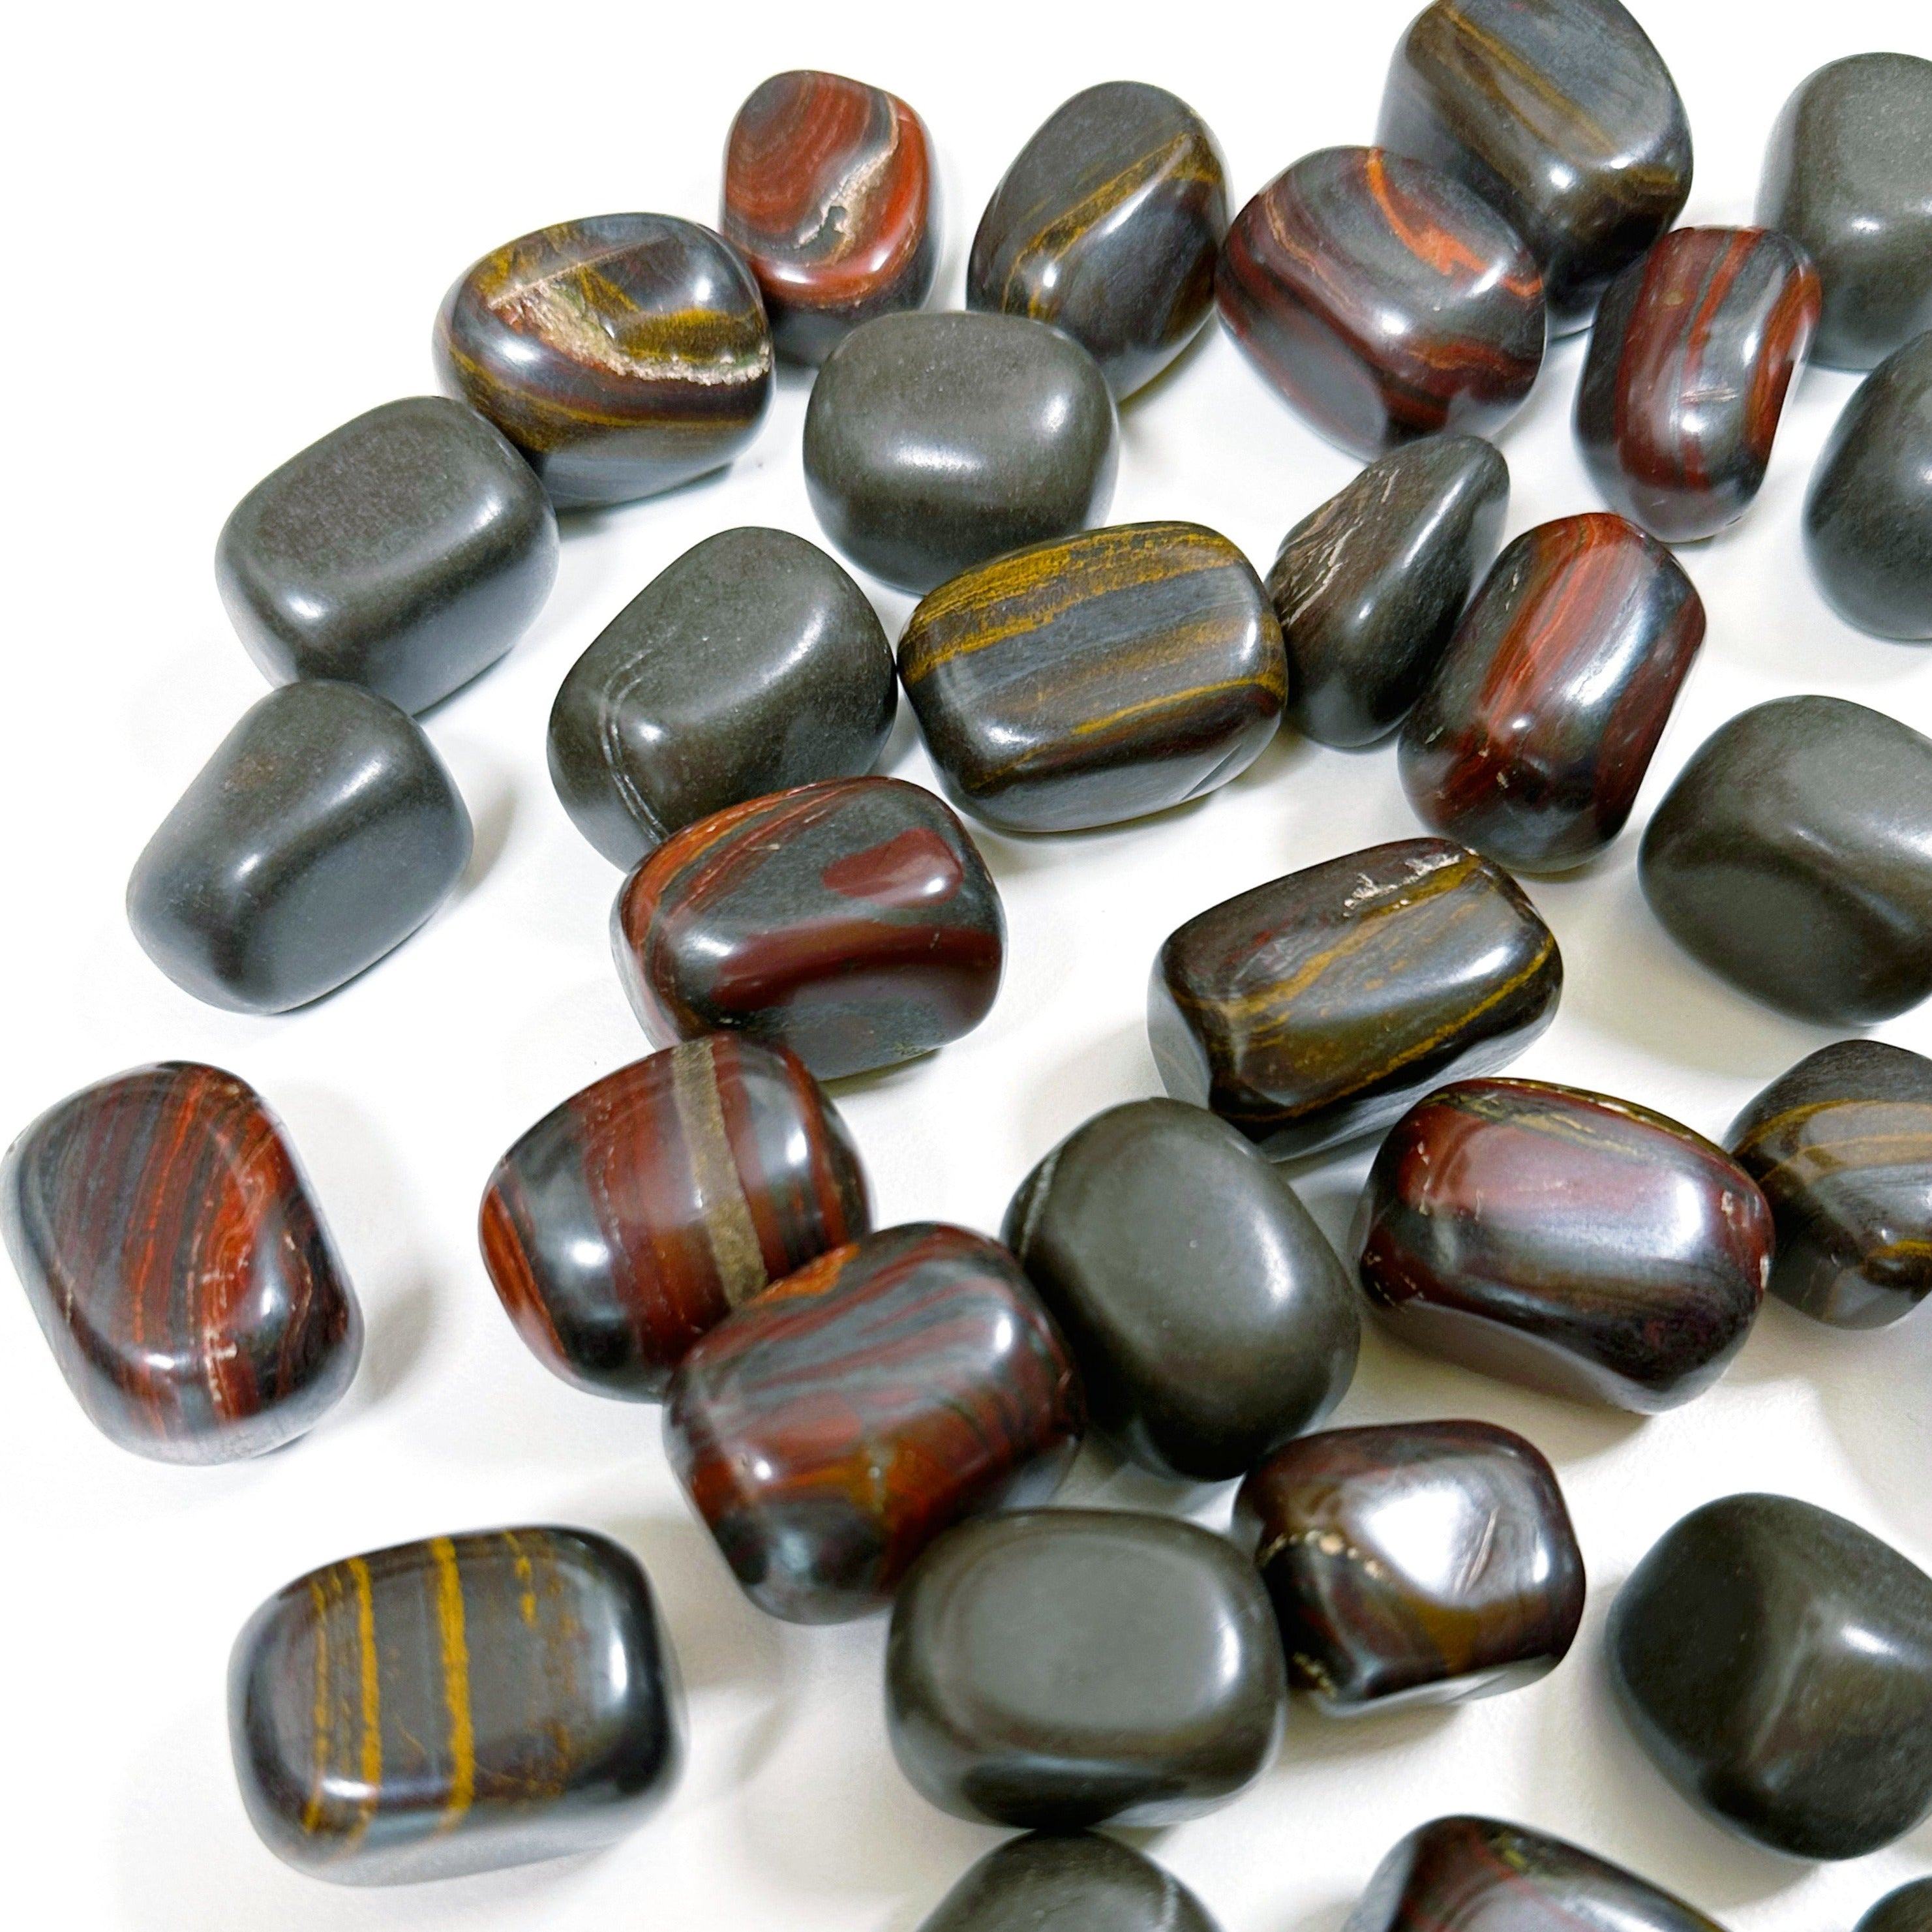 TIGER IRON CHONK - 33 bday, chonk, end of year sale, focus gift bundle, holiday sale, pocket crystal, pocket stone, recently added, tiger iron, tumble, tumbled, tumbled stone - The Mineral Maven